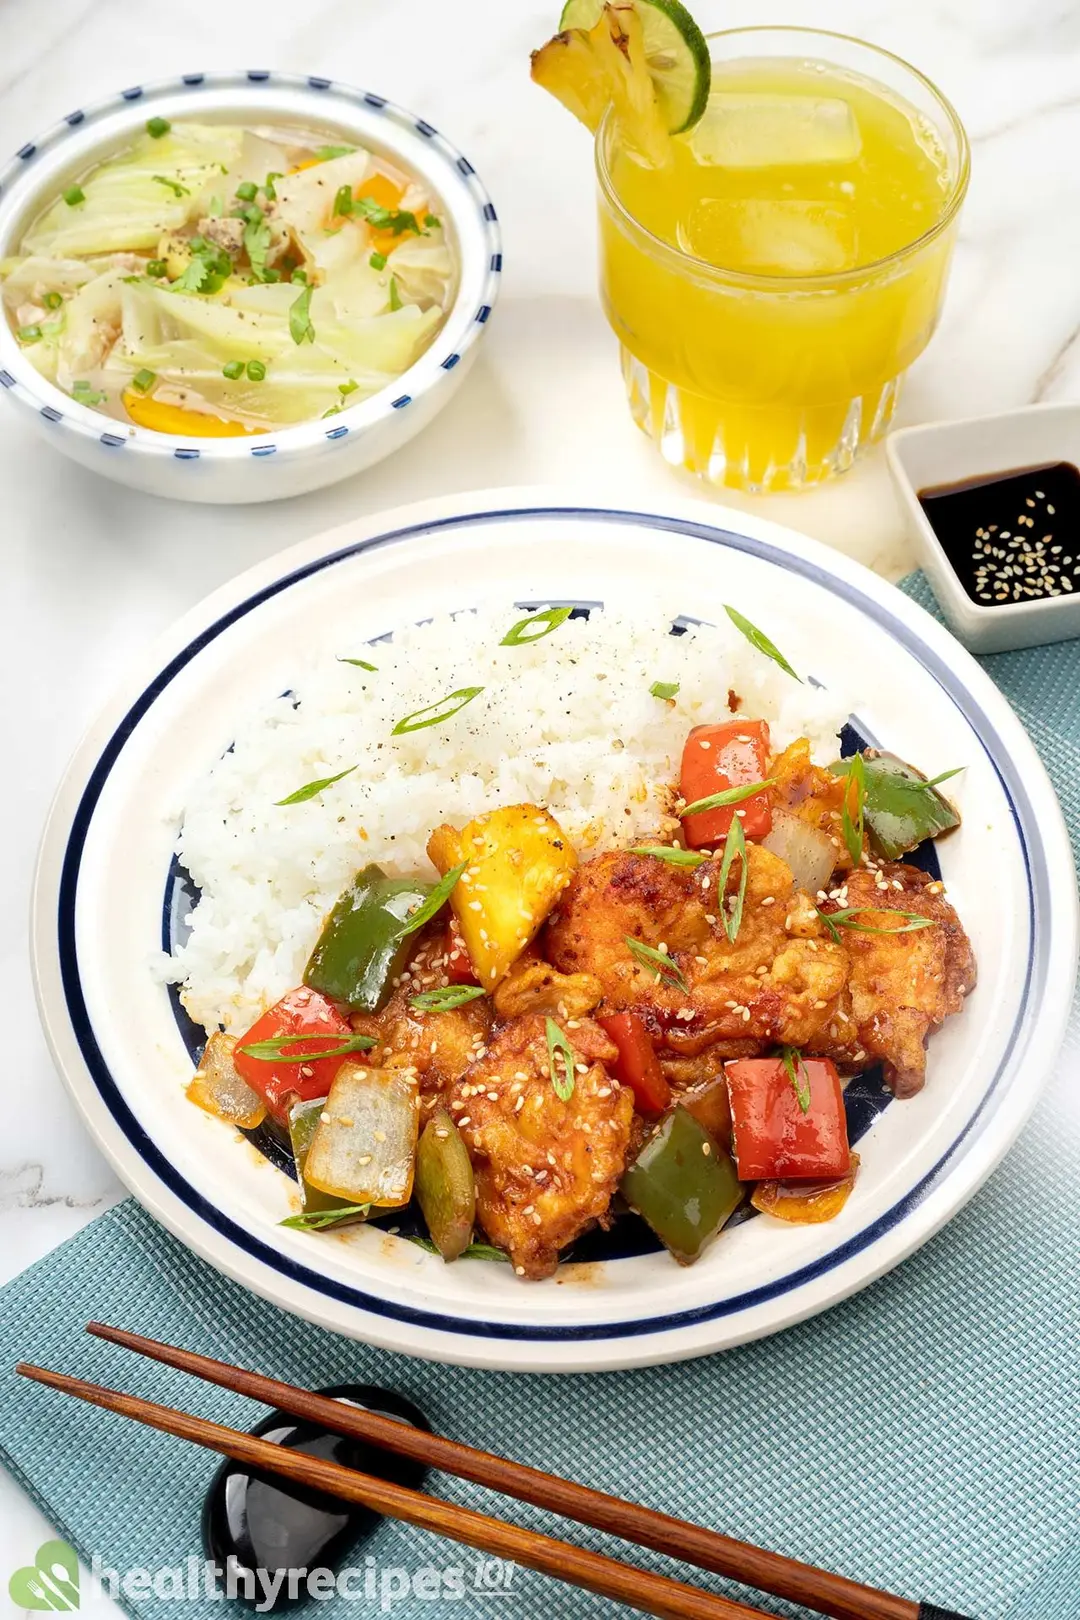 A plate of white rice, battered shrimp, peppers, and pineapples, on a blue kitchen mattress with garnishing food items